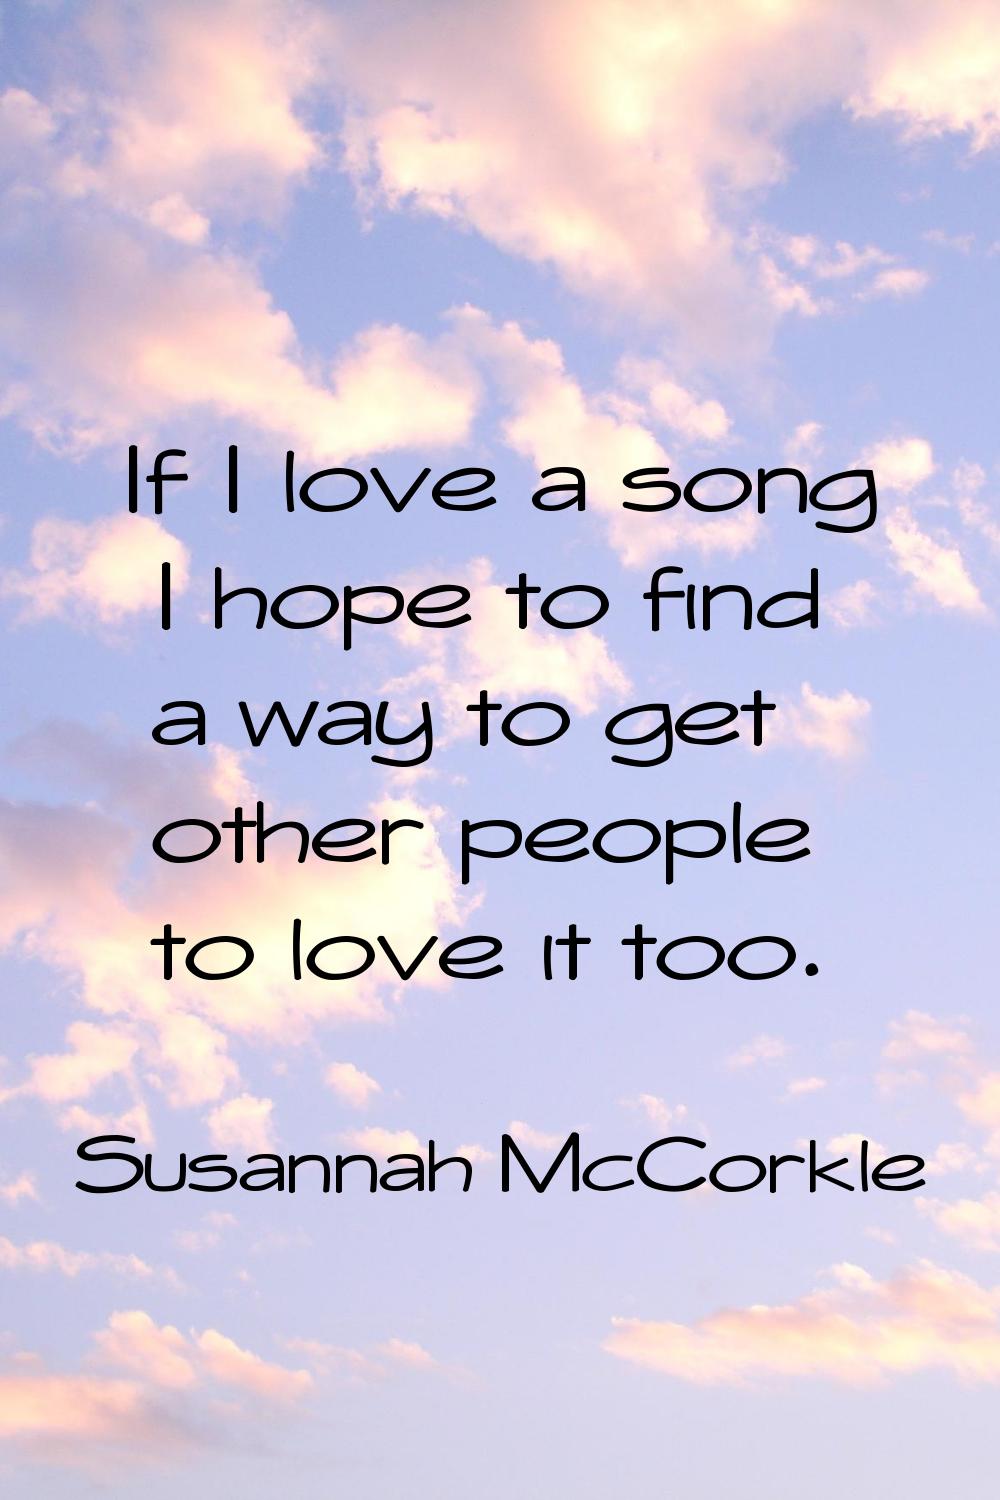 If I love a song I hope to find a way to get other people to love it too.